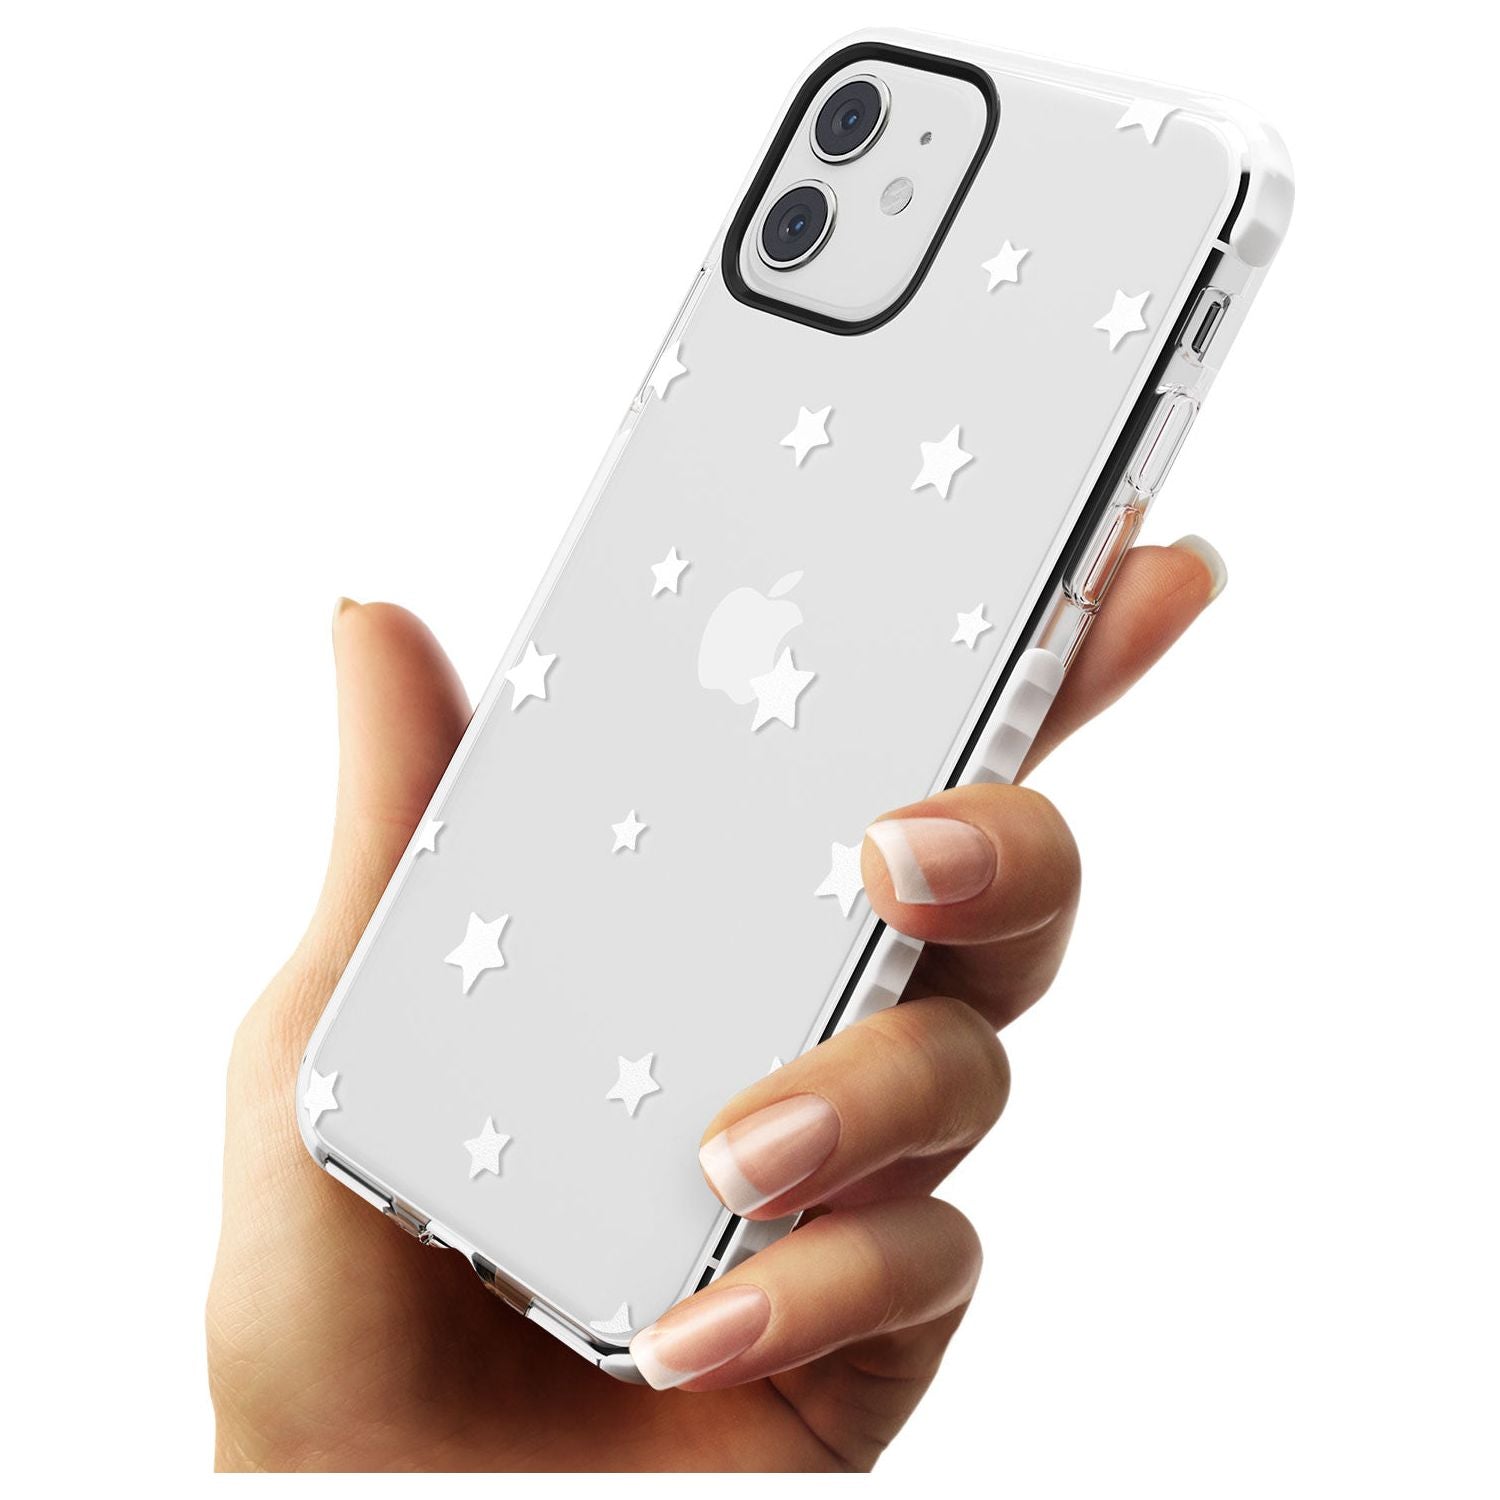 Pastel Stars Pattern Impact Phone Case for iPhone 11